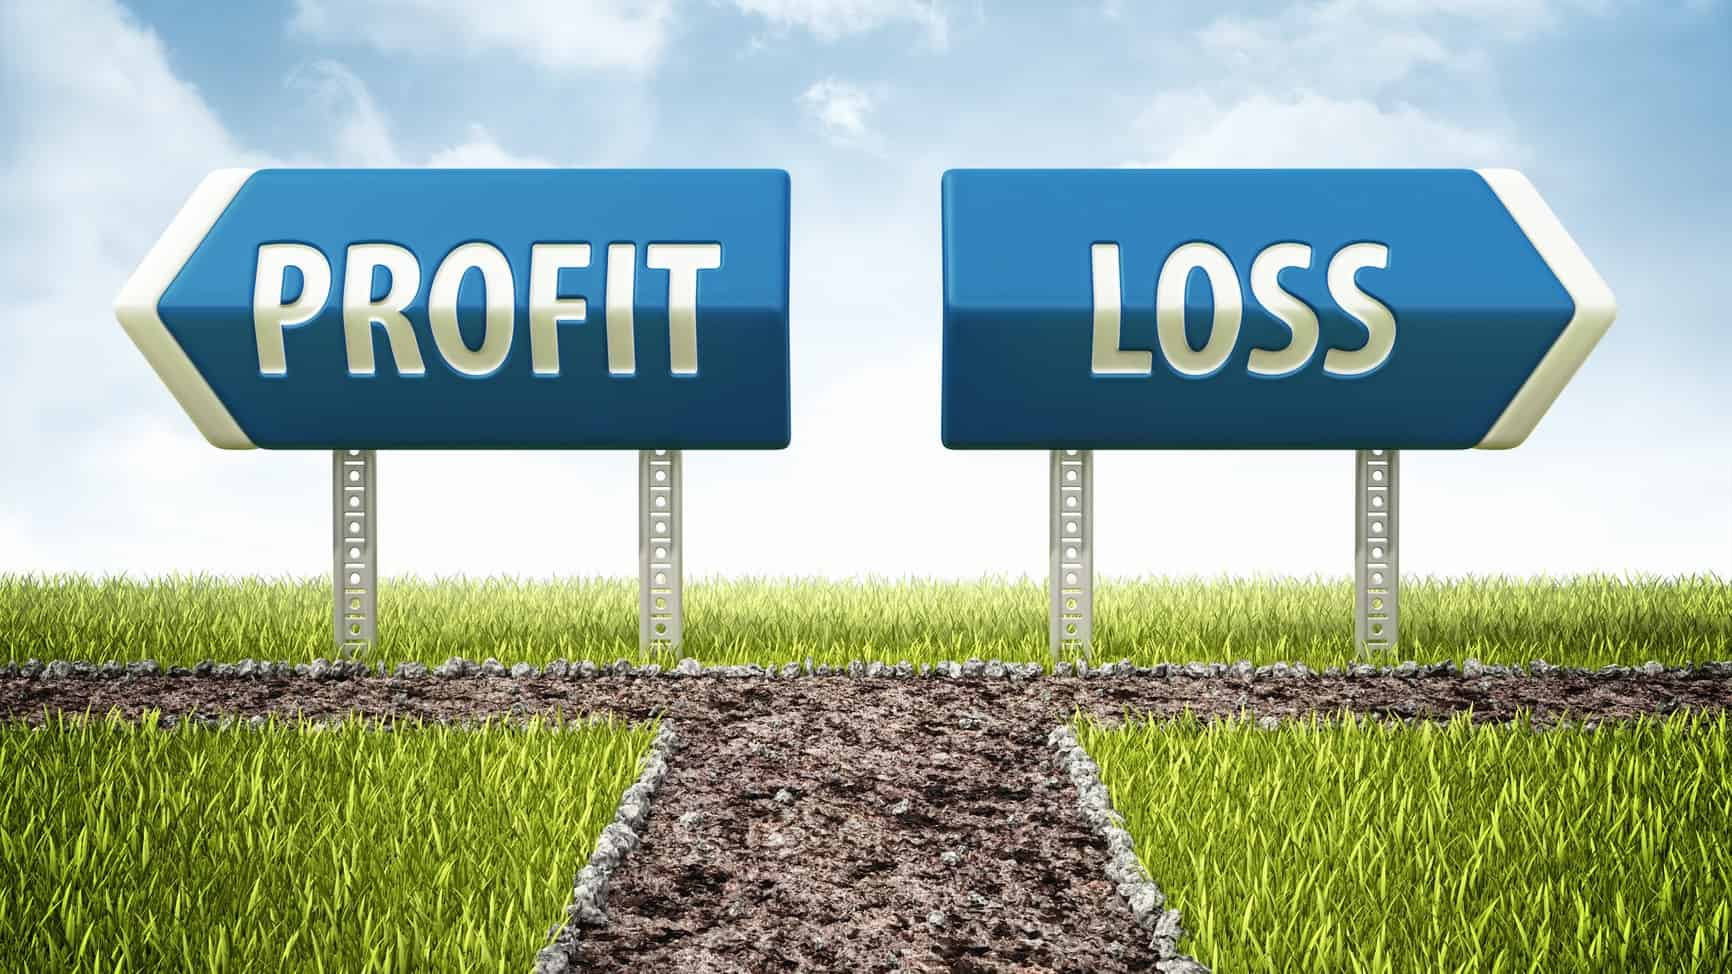 A path through the grass leads to two signs, pointing to profit and loss